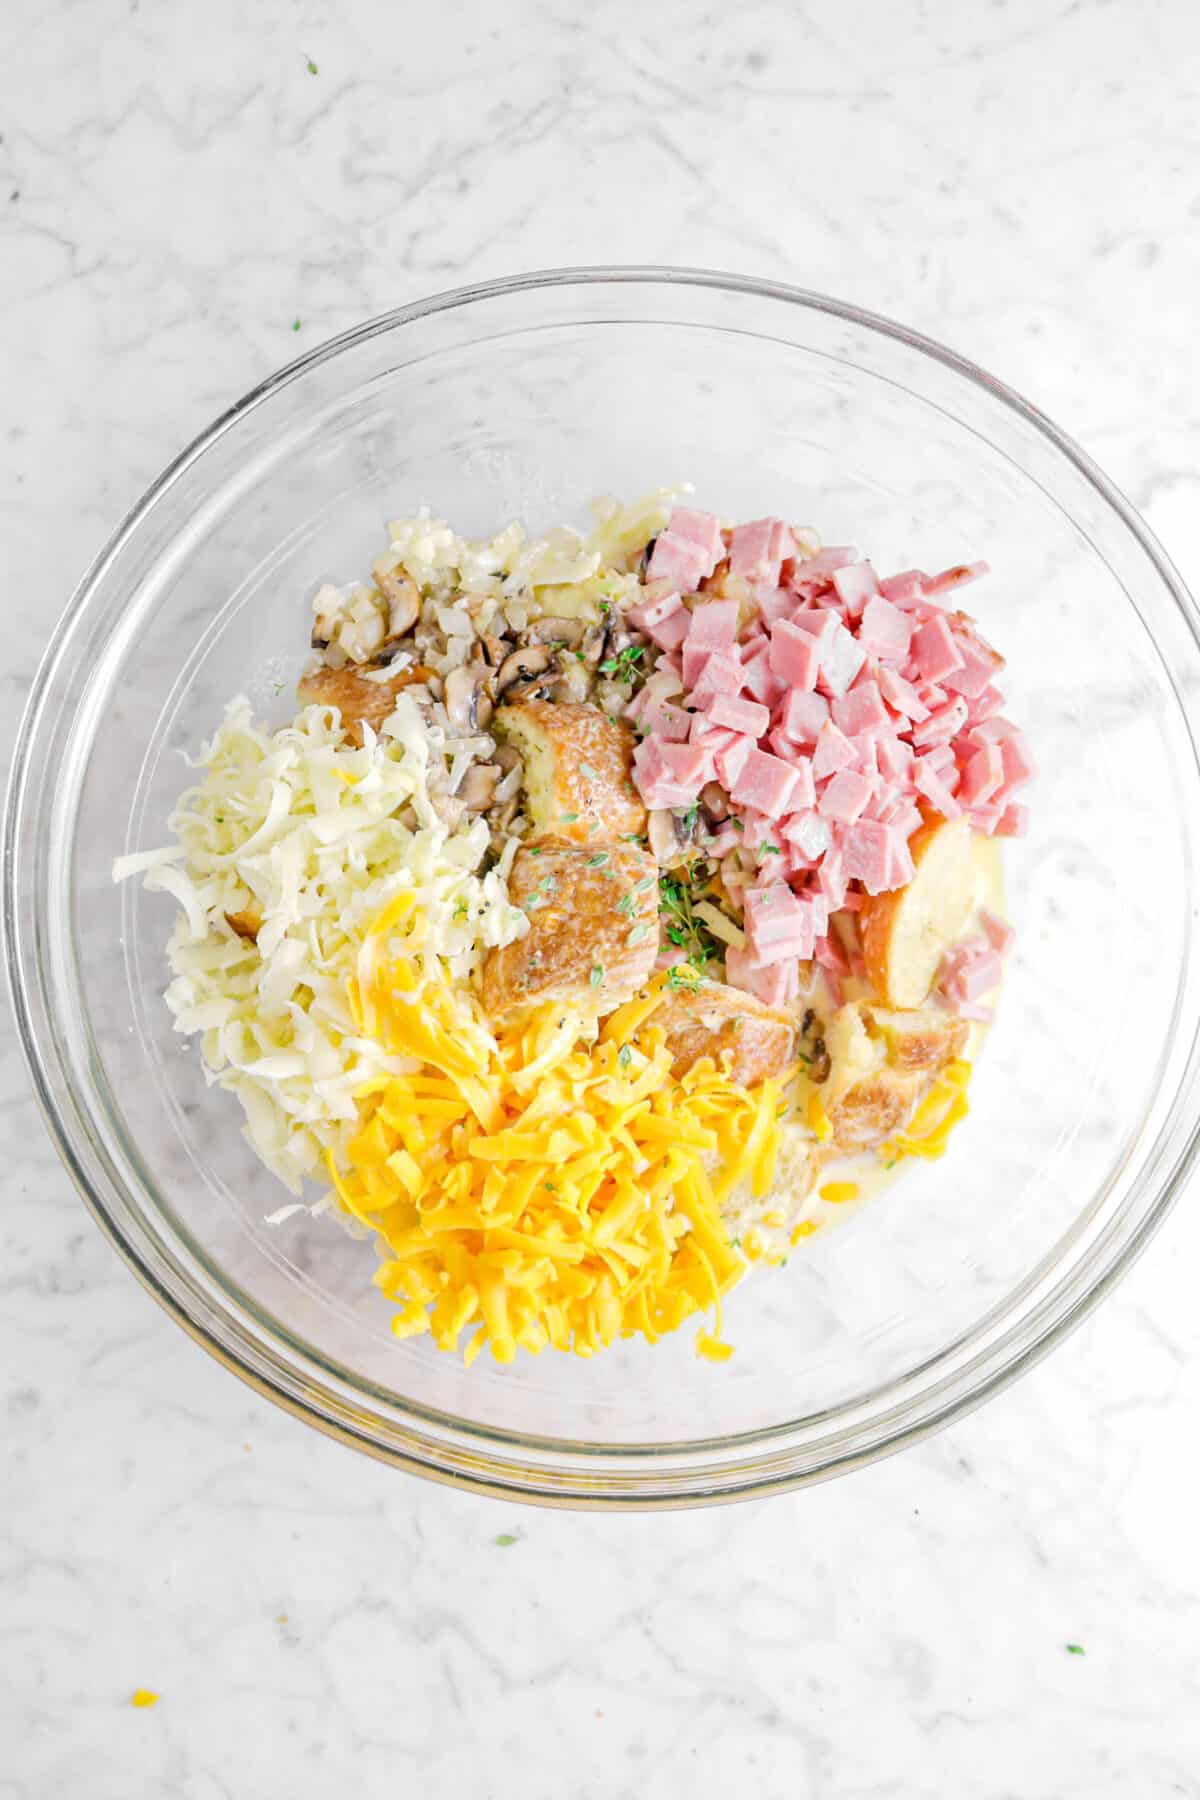 ham, sautéed vegetables, fontina, cheddar, thyme, croissants, and egg mixture in glass bowl